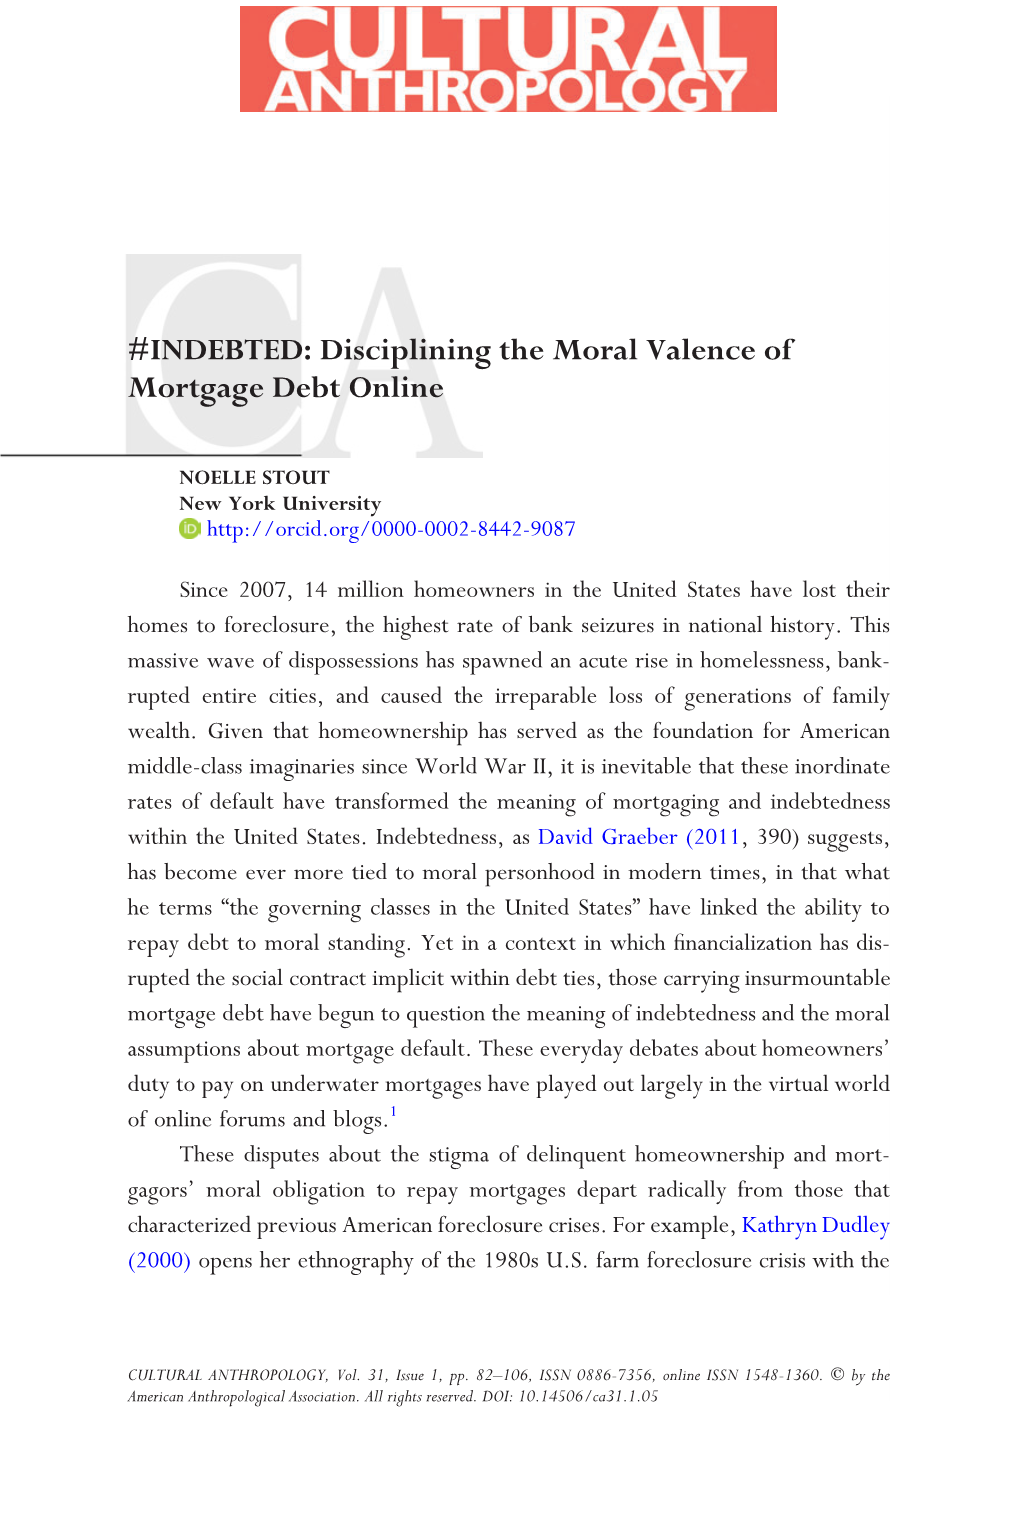 INDEBTED: Disciplining the Moral Valence of Mortgage Debt Online